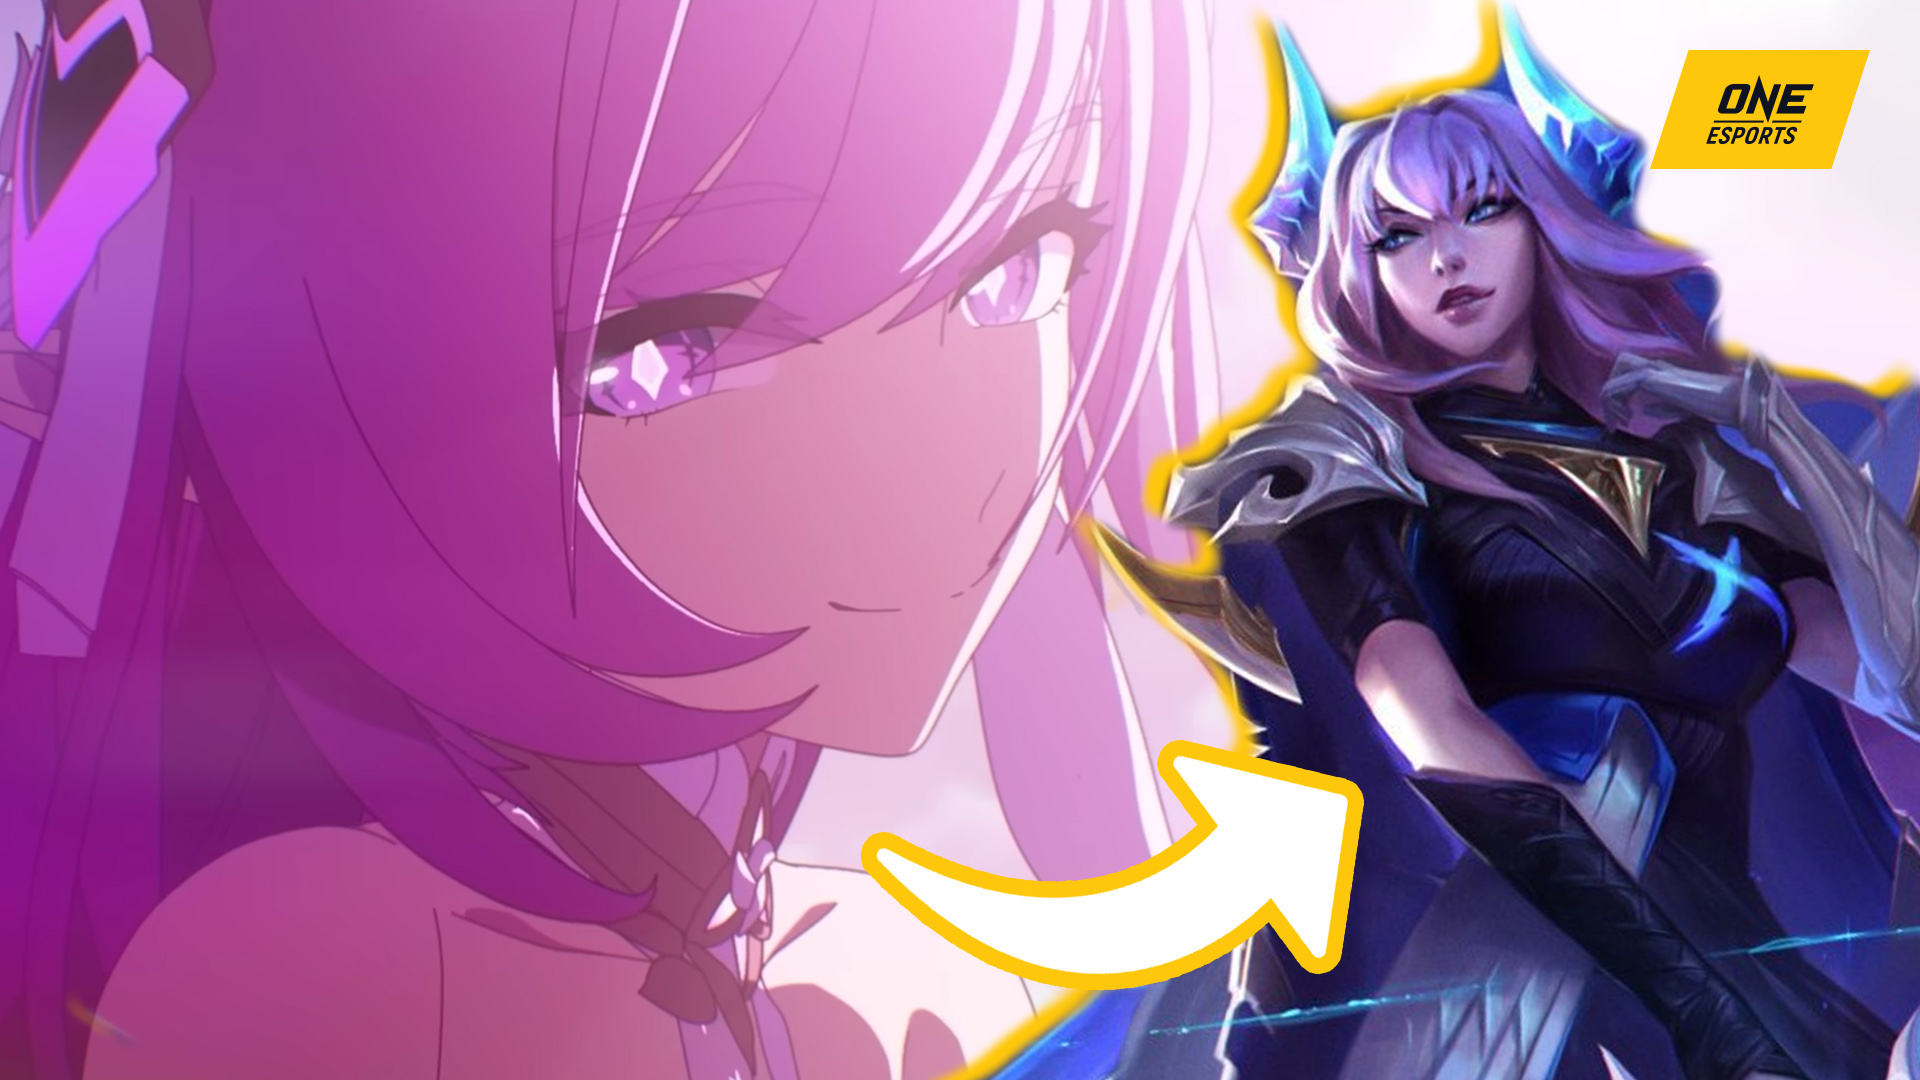 This is how Honkai Impact 3rd’s Elysia might look like if she was a League of Legends champion